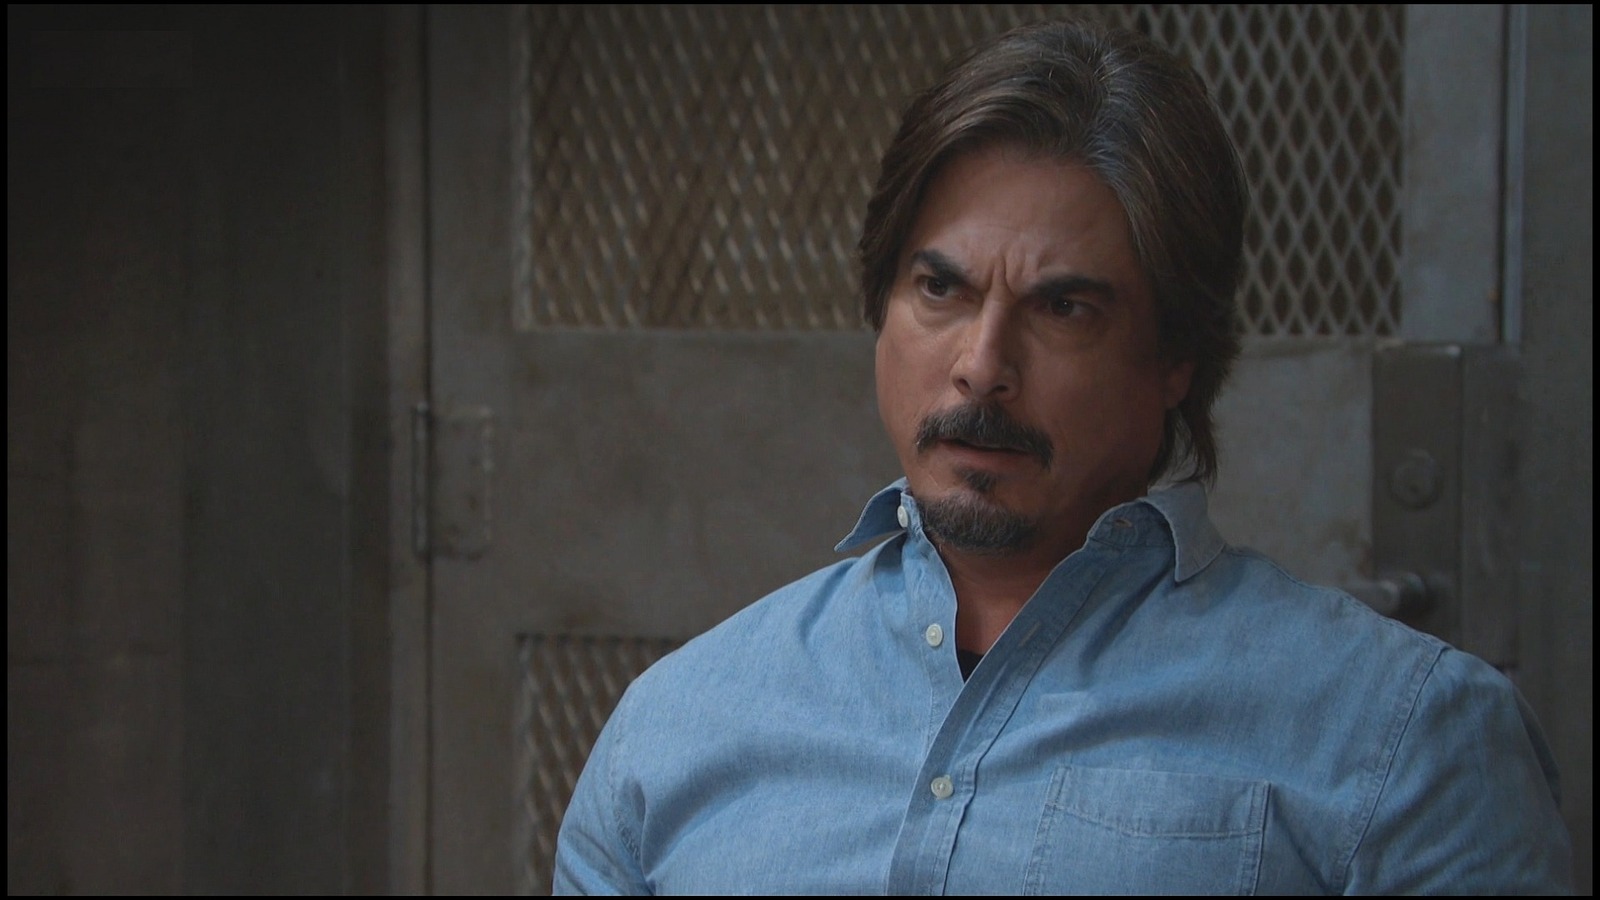 Bryan Dattilo Brings Lucas Horton Back To Days Of Our Lives